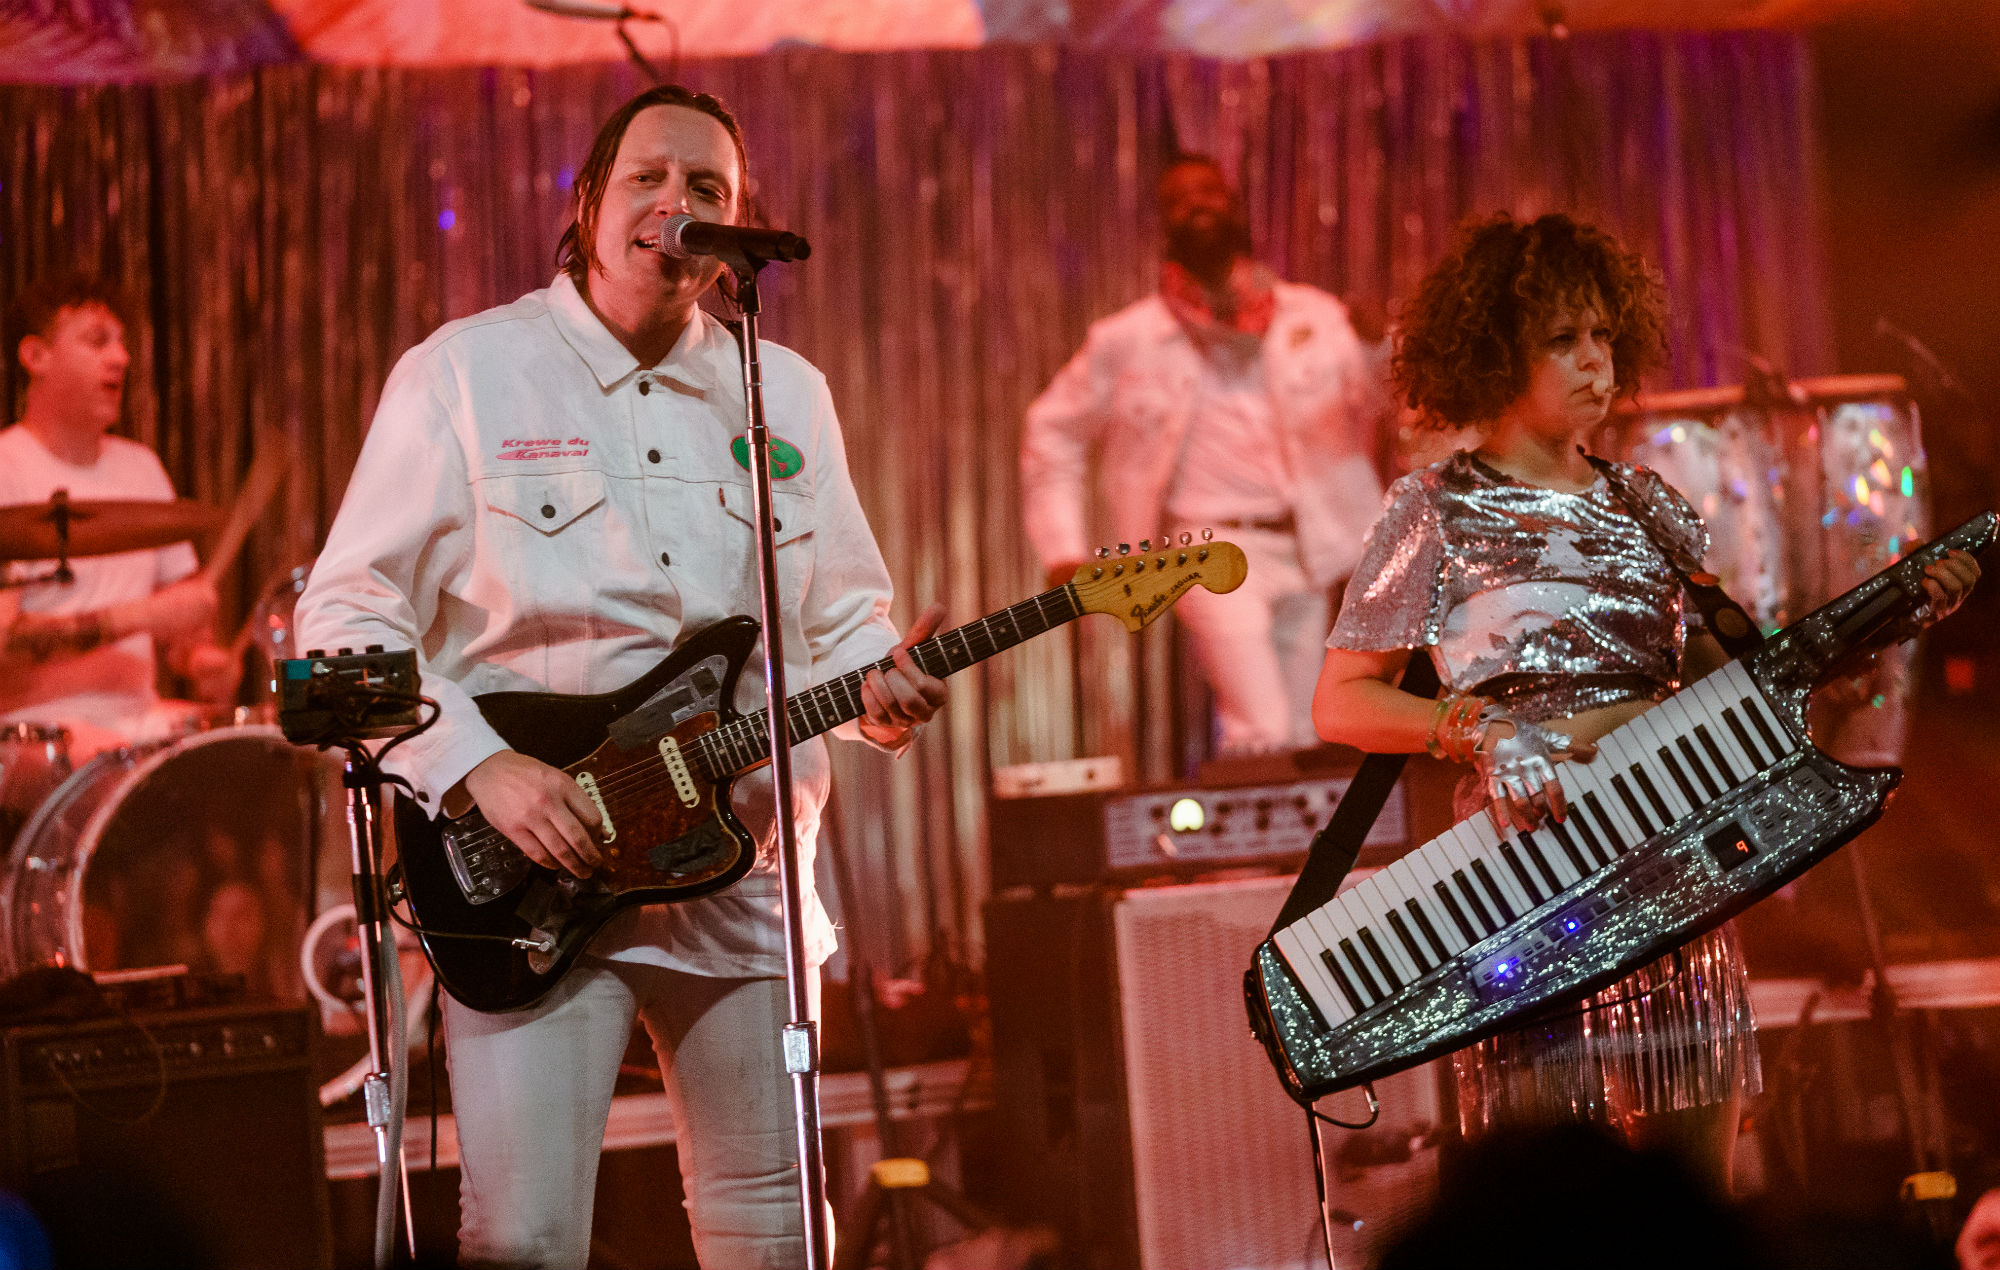 Arcade Fire rallies the youth with new song